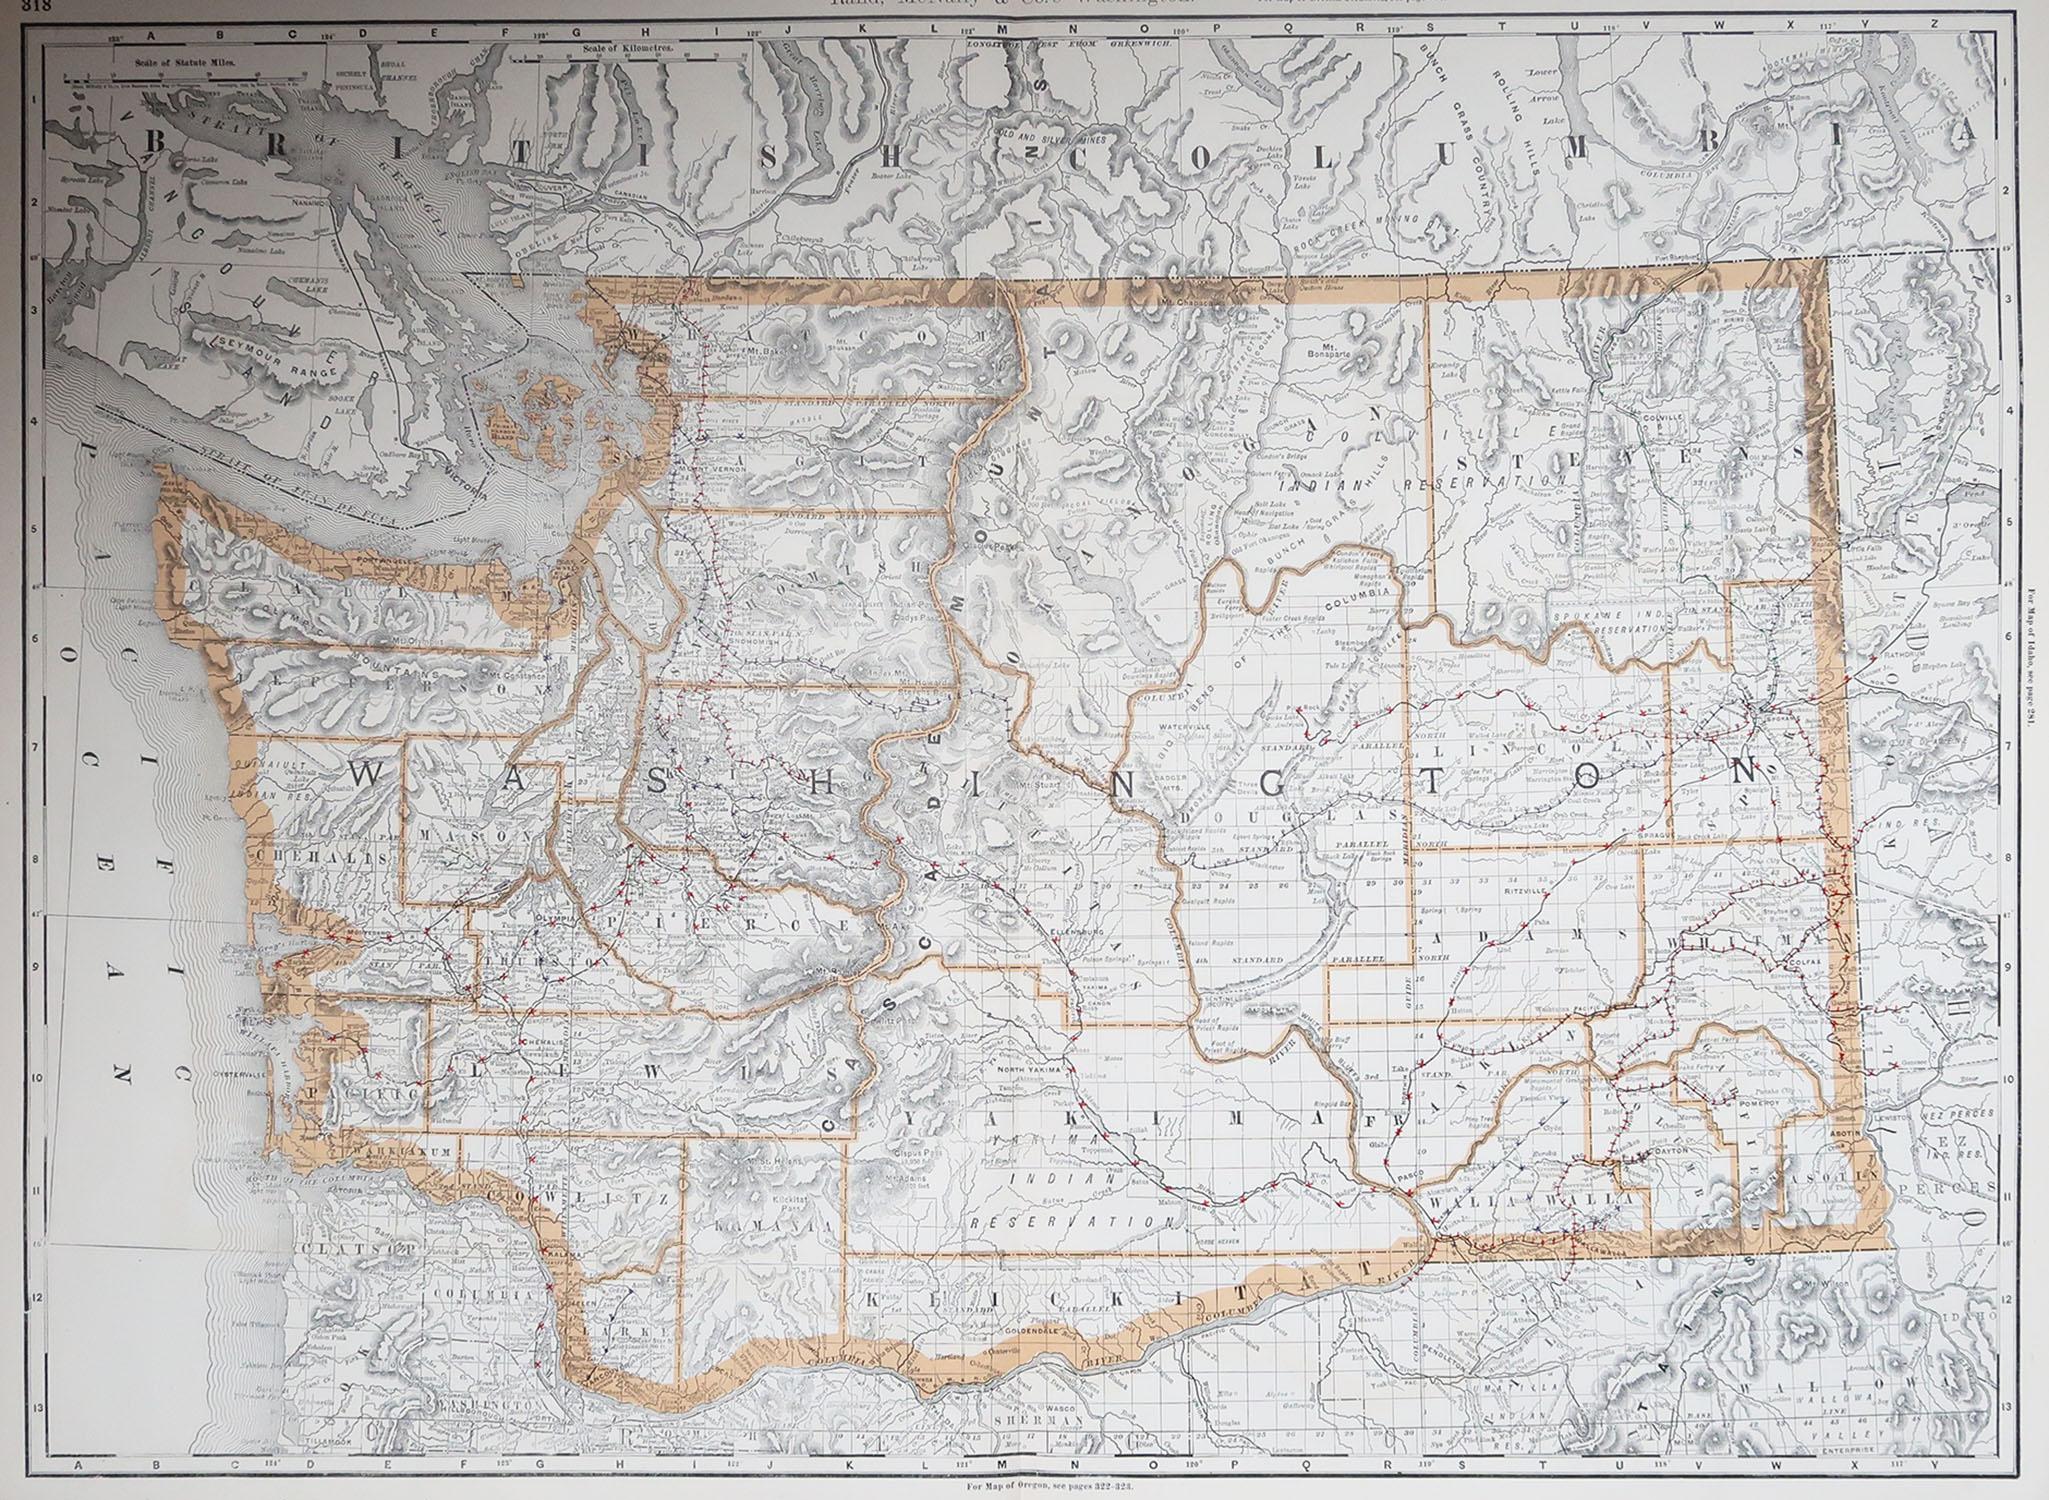 Fabulous map of Washington.

Original color.

By Rand, McNally & Co.

Published, 1894.

Unframed.

Free shipping.